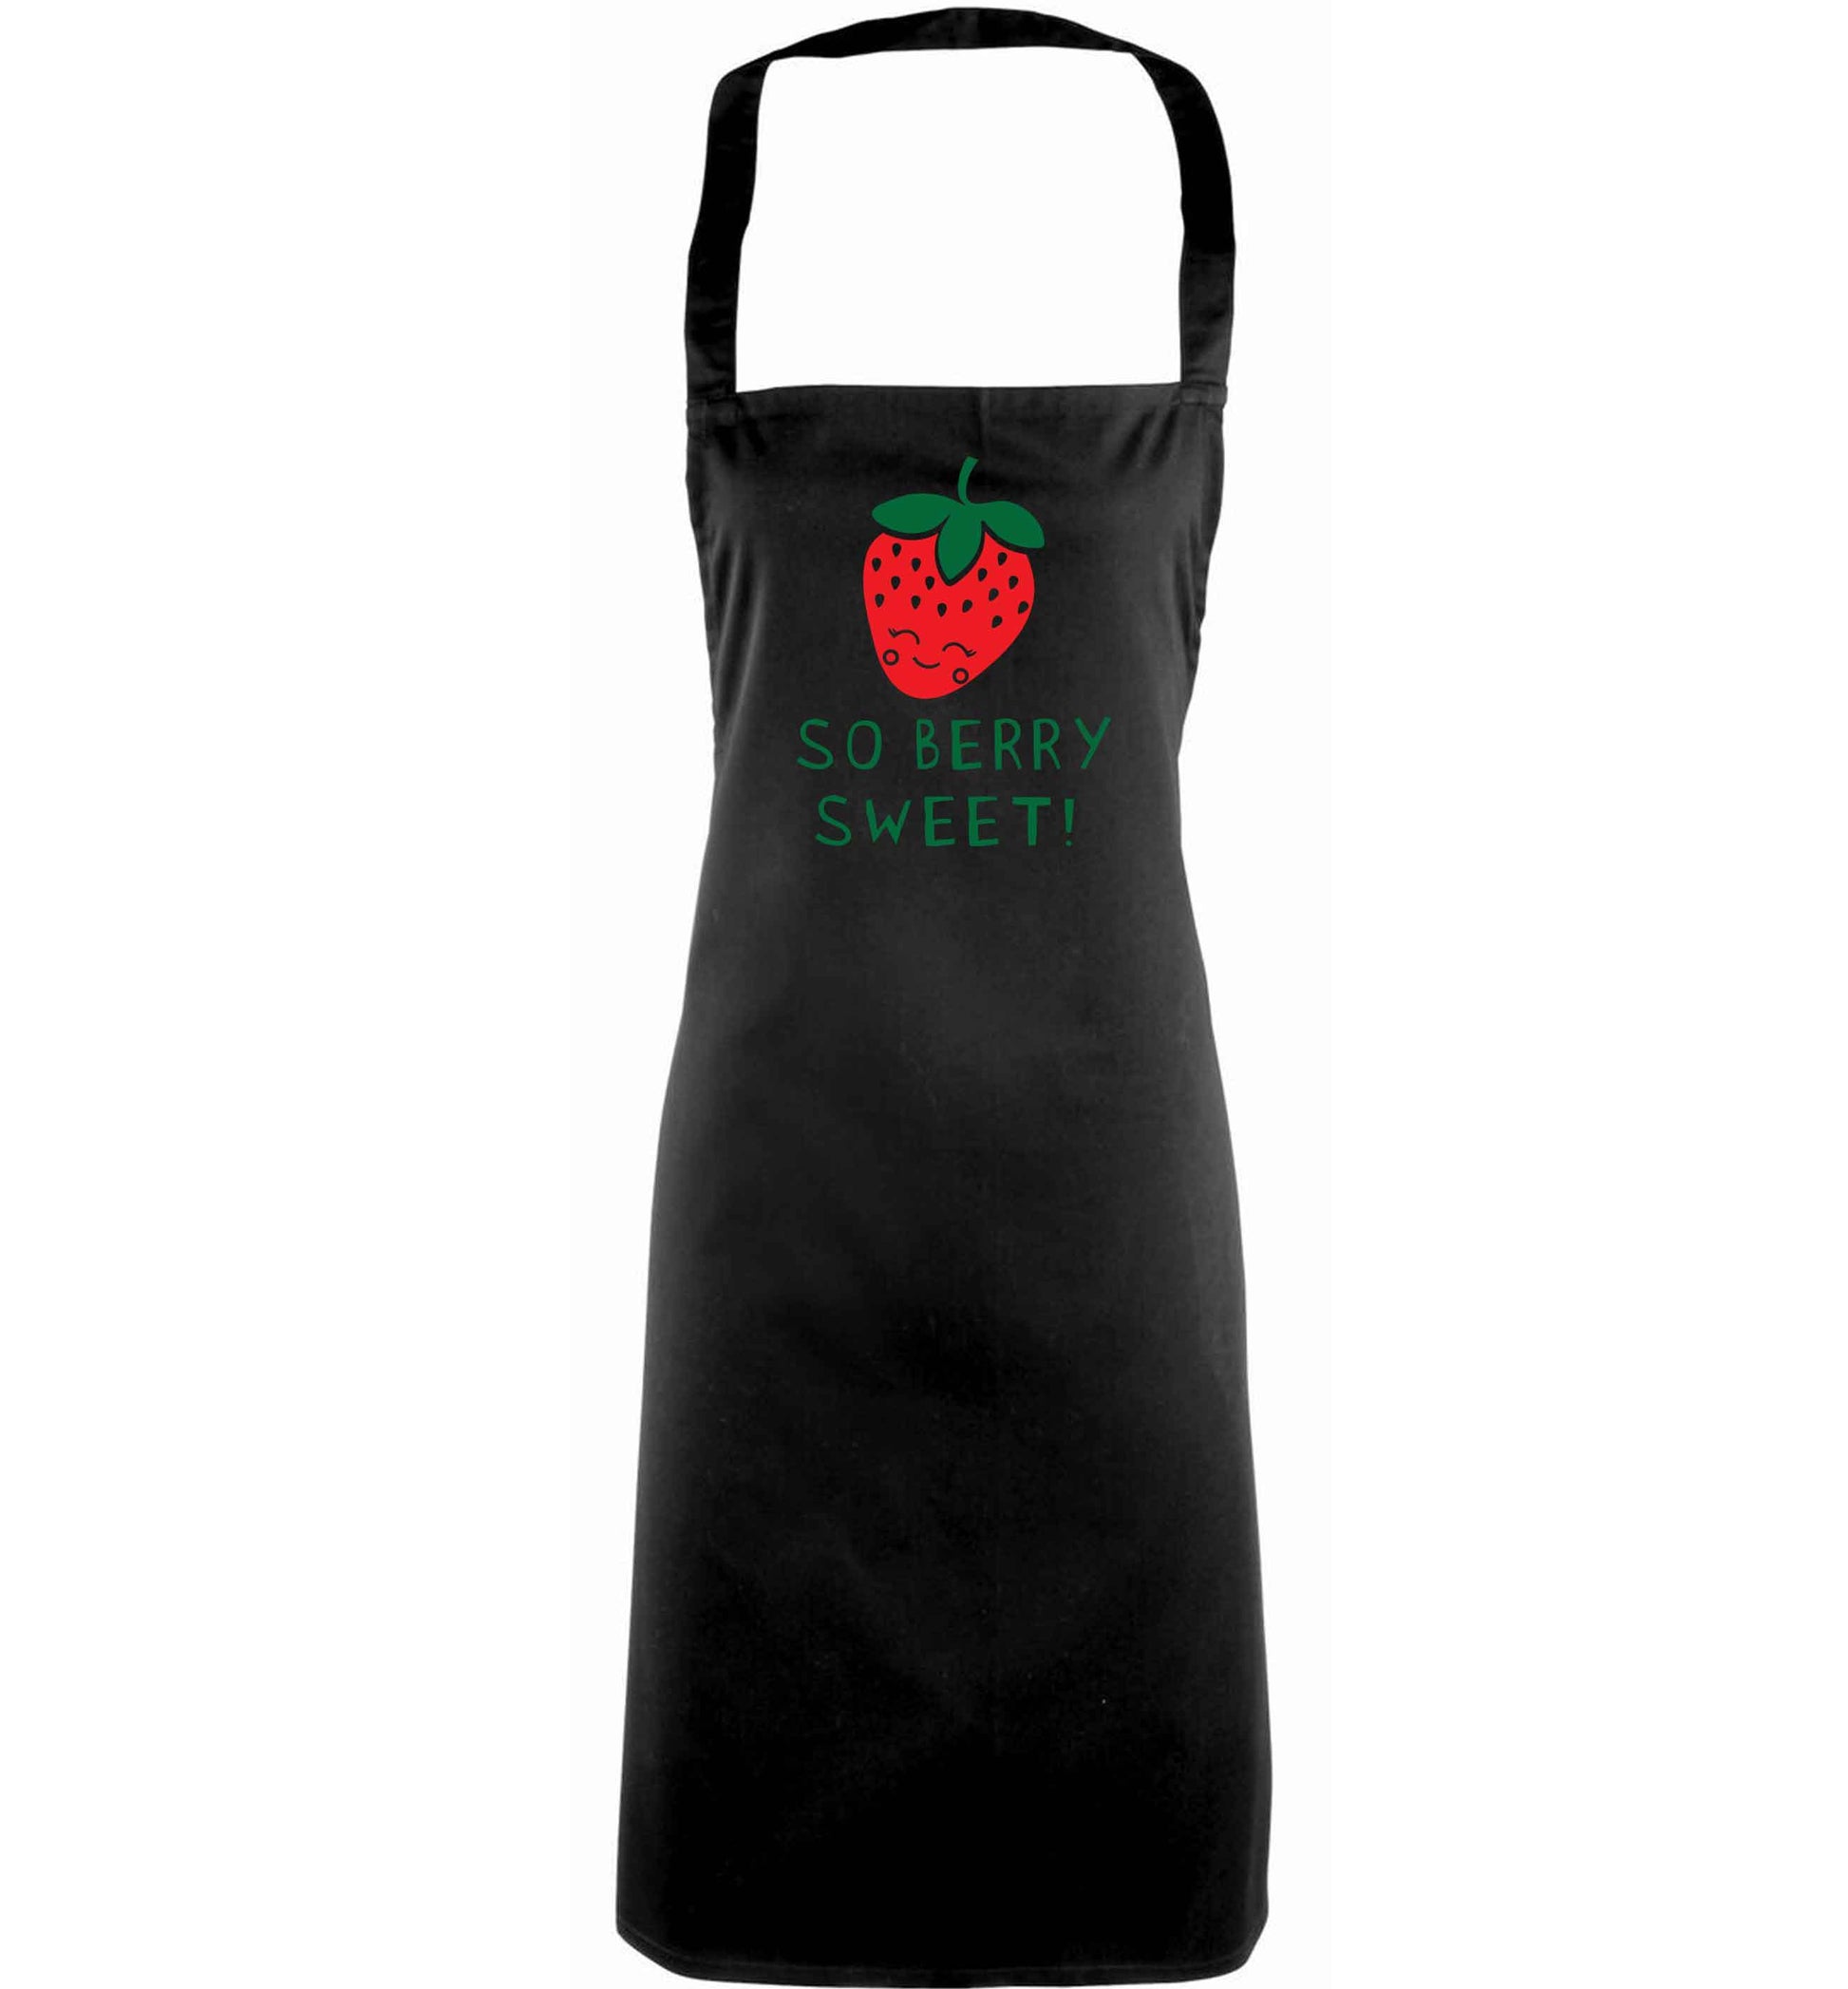 So berry sweet adults black apron